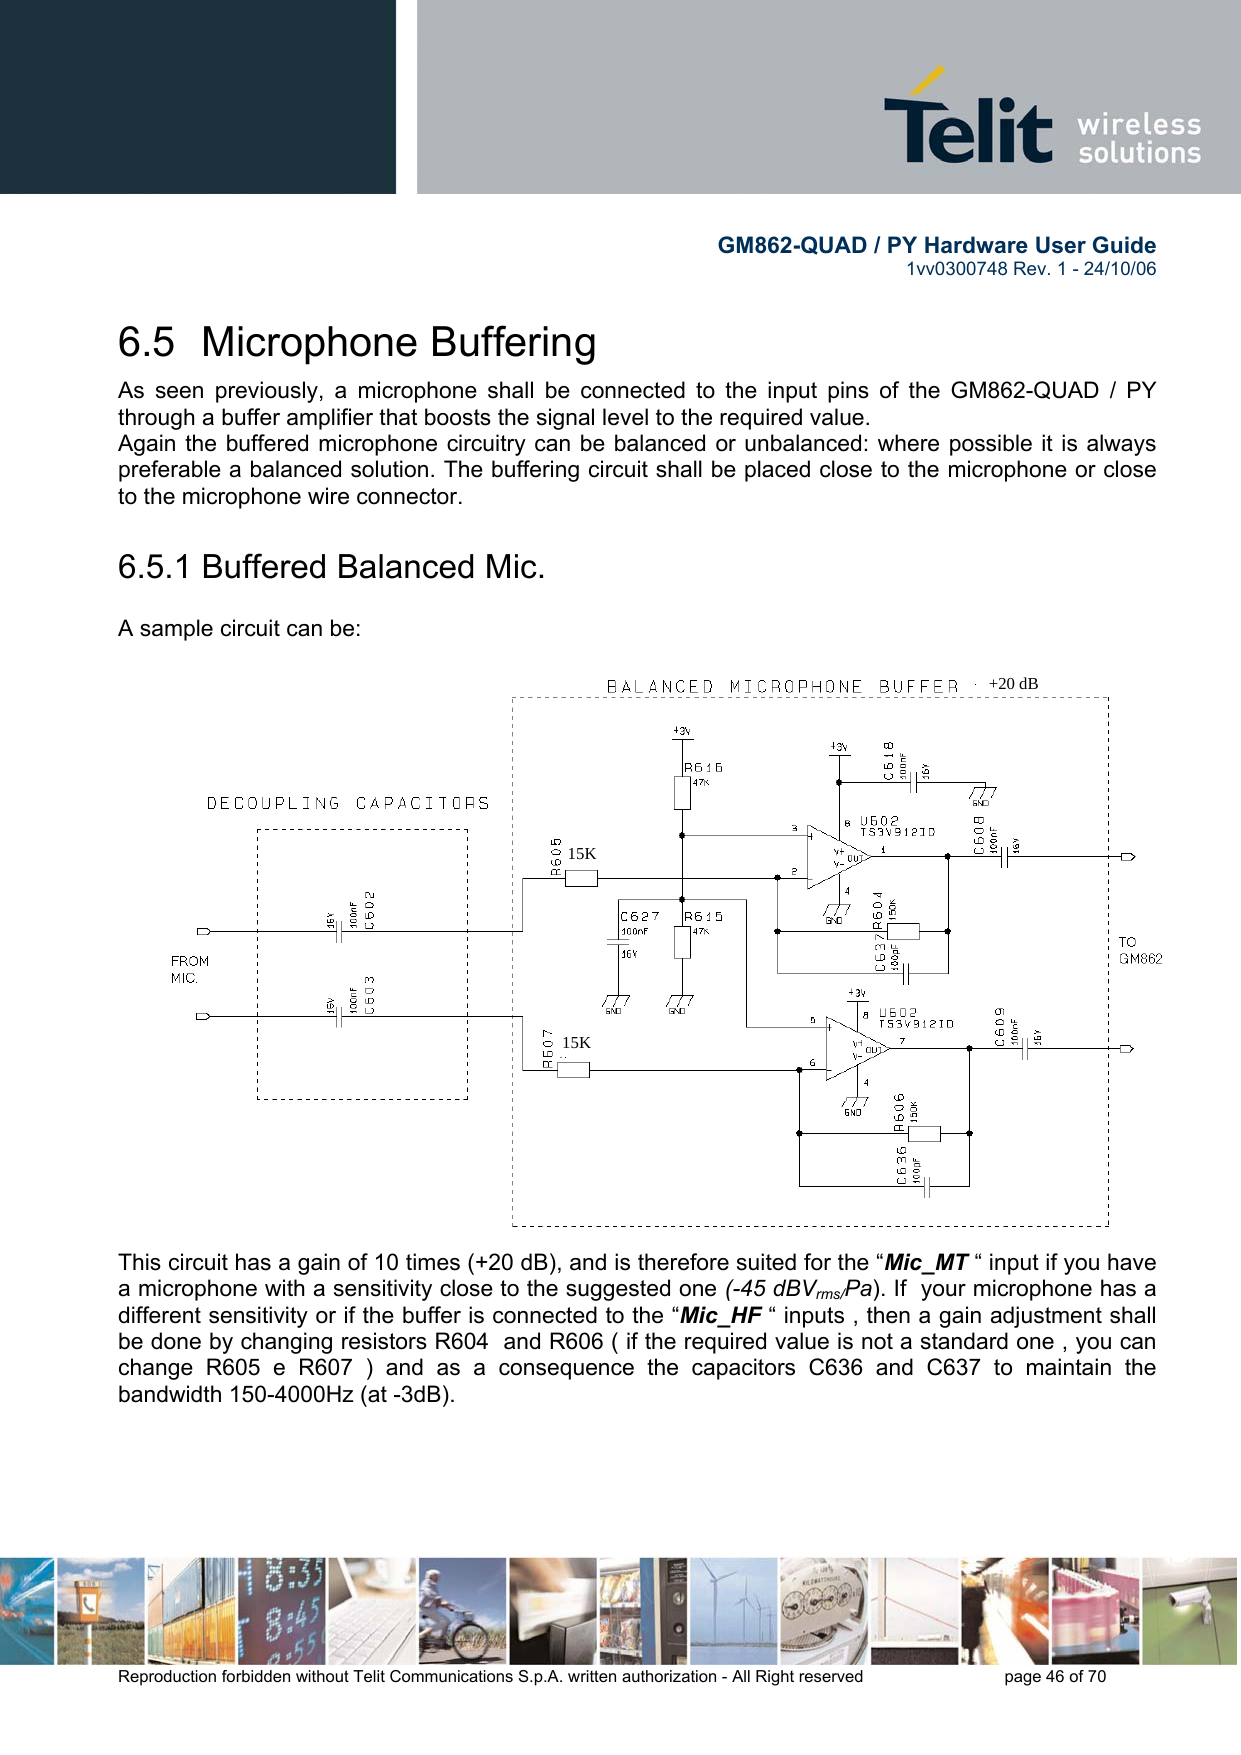        GM862-QUAD / PY Hardware User Guide   1vv0300748 Rev. 1 - 24/10/06    Reproduction forbidden without Telit Communications S.p.A. written authorization - All Right reserved    page 46 of 70  6.5 Microphone Buffering As seen previously, a microphone shall be connected to the input pins of the GM862-QUAD / PY through a buffer amplifier that boosts the signal level to the required value. Again the buffered microphone circuitry can be balanced or unbalanced: where possible it is always preferable a balanced solution. The buffering circuit shall be placed close to the microphone or close to the microphone wire connector. 6.5.1 Buffered Balanced Mic.  A sample circuit can be: This circuit has a gain of 10 times (+20 dB), and is therefore suited for the “Mic_MT “ input if you have a microphone with a sensitivity close to the suggested one (-45 dBVrms/Pa). If  your microphone has a different sensitivity or if the buffer is connected to the “Mic_HF “ inputs , then a gain adjustment shall be done by changing resistors R604  and R606 ( if the required value is not a standard one , you can change R605 e R607 ) and as a consequence the capacitors C636 and C637 to maintain the bandwidth 150-4000Hz (at -3dB).  270pF  270pF  +20 dB15K15K